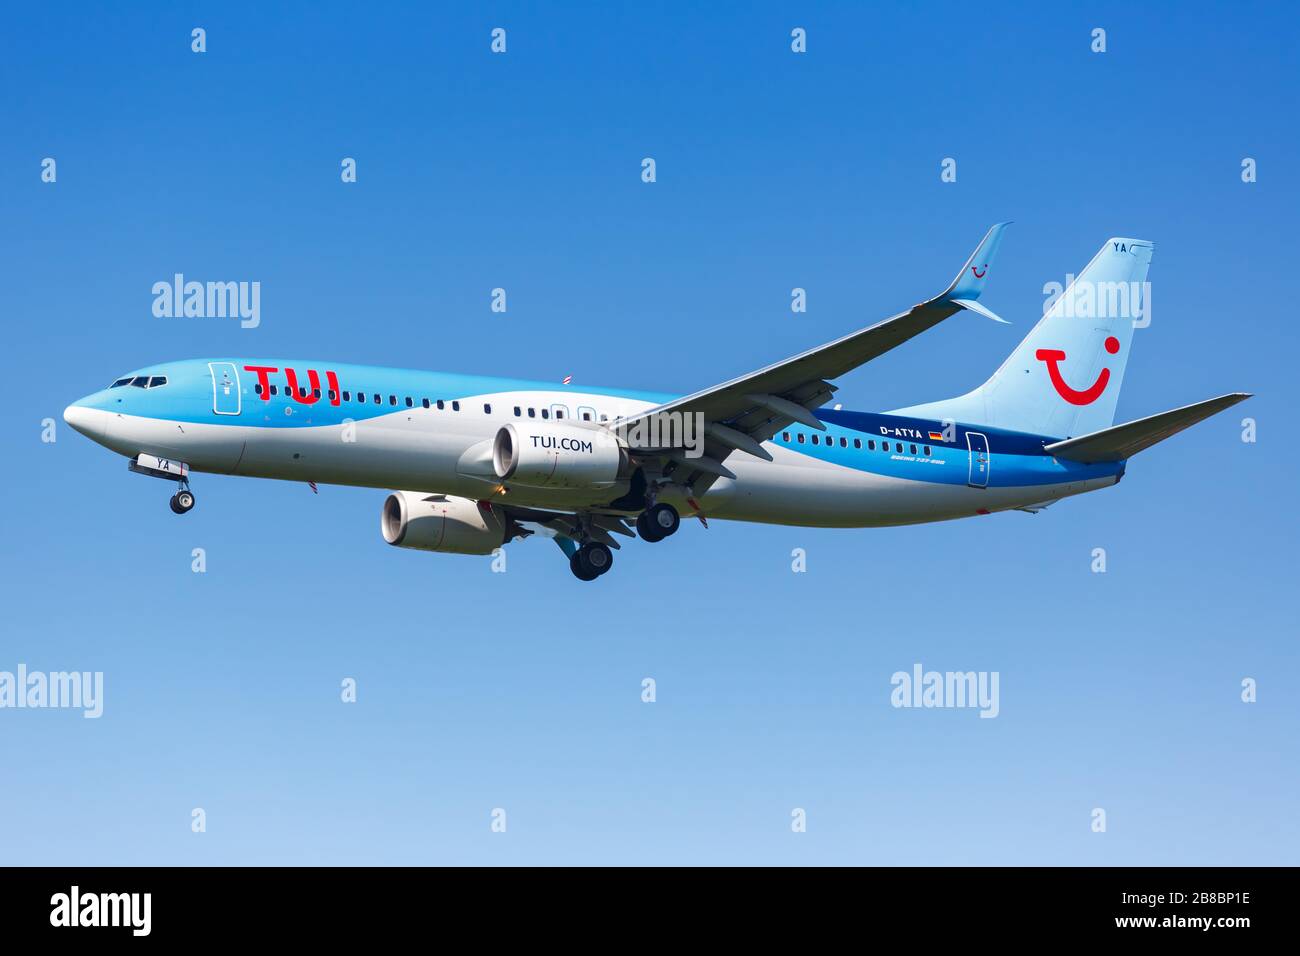 Mulhouse, France – August 31, 2019: TUI Boeing 737-800 airplane at Mulhouse airport (EAP) in France. Boeing is an American aircraft manufacturer headq Stock Photo